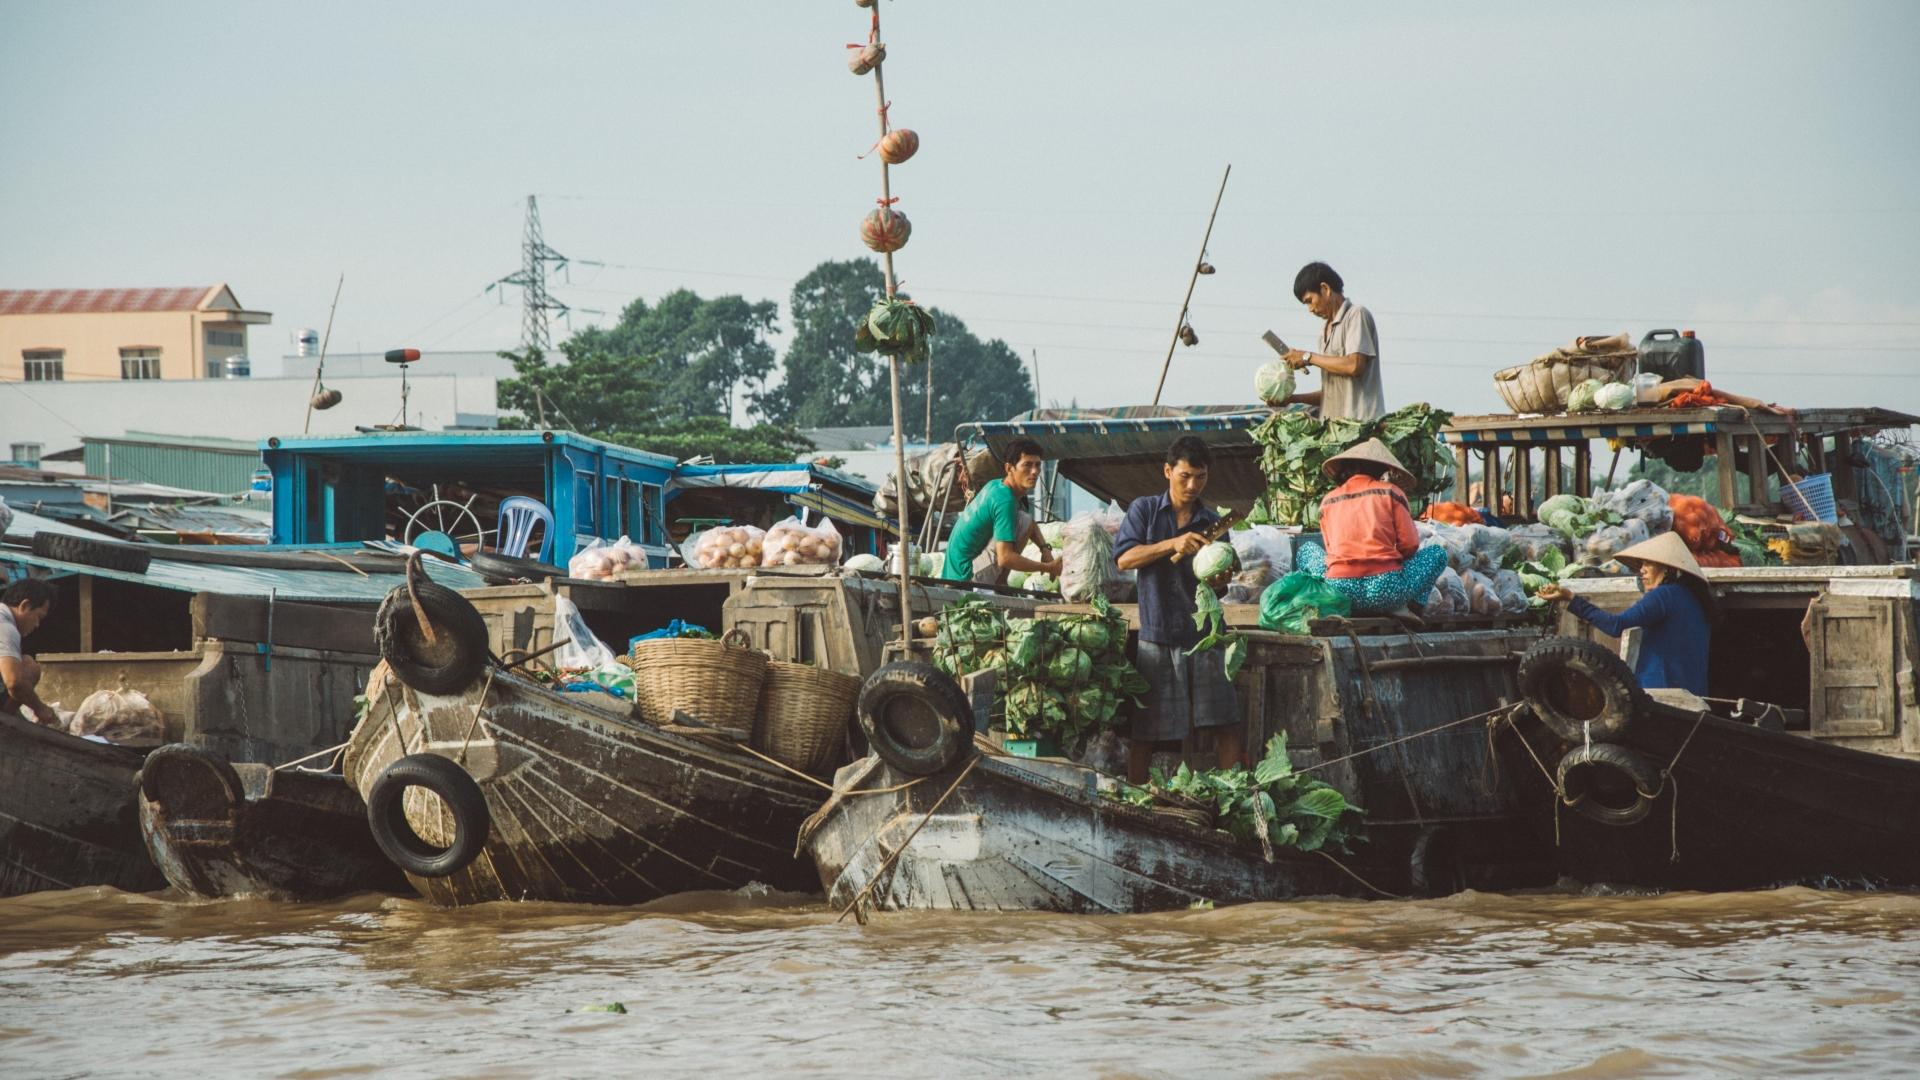 zero waste to mekong river project launched